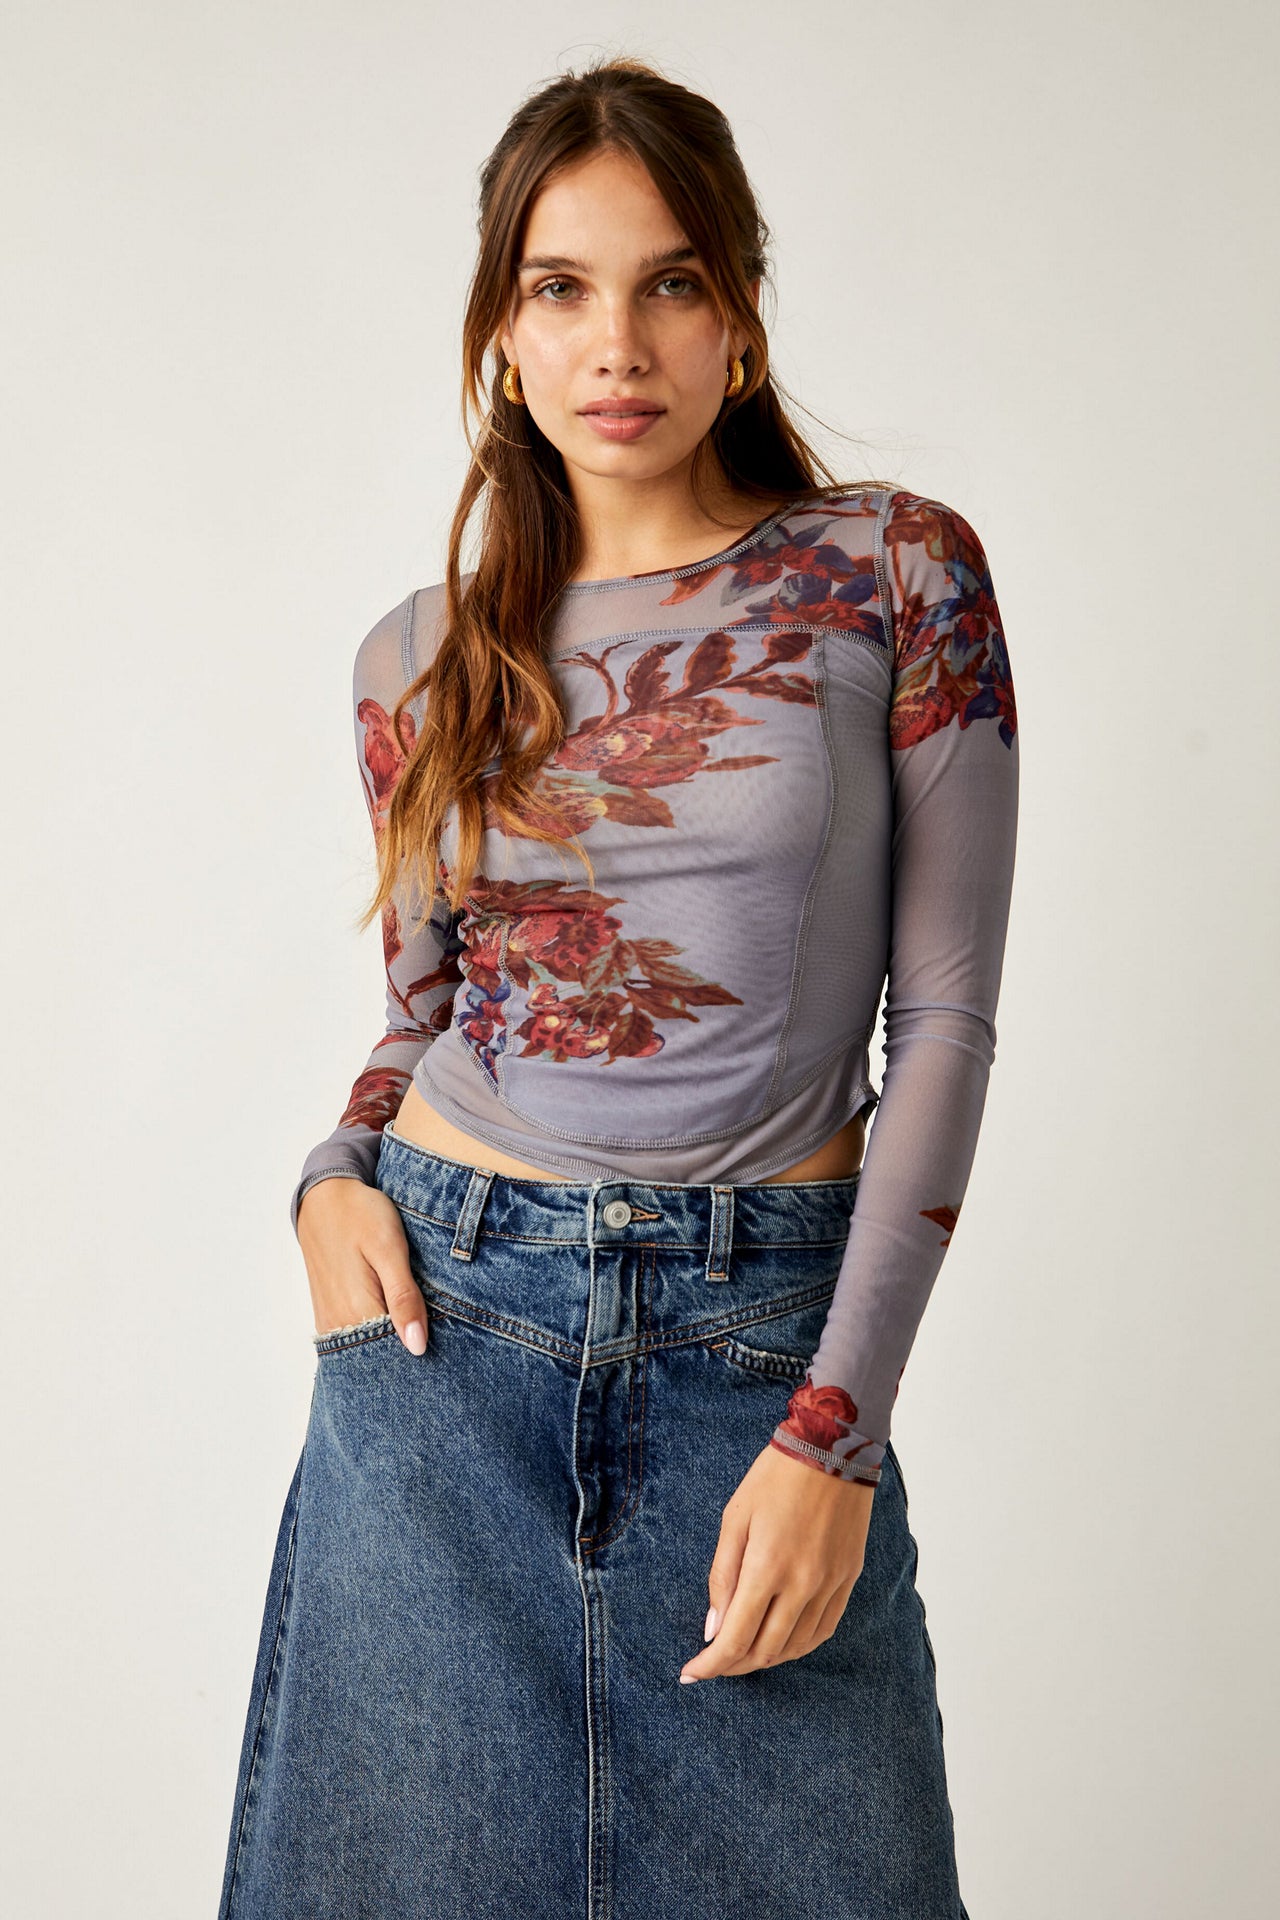 Bettys Garden Top Blue, Long Blouse by Free People | LIT Boutique